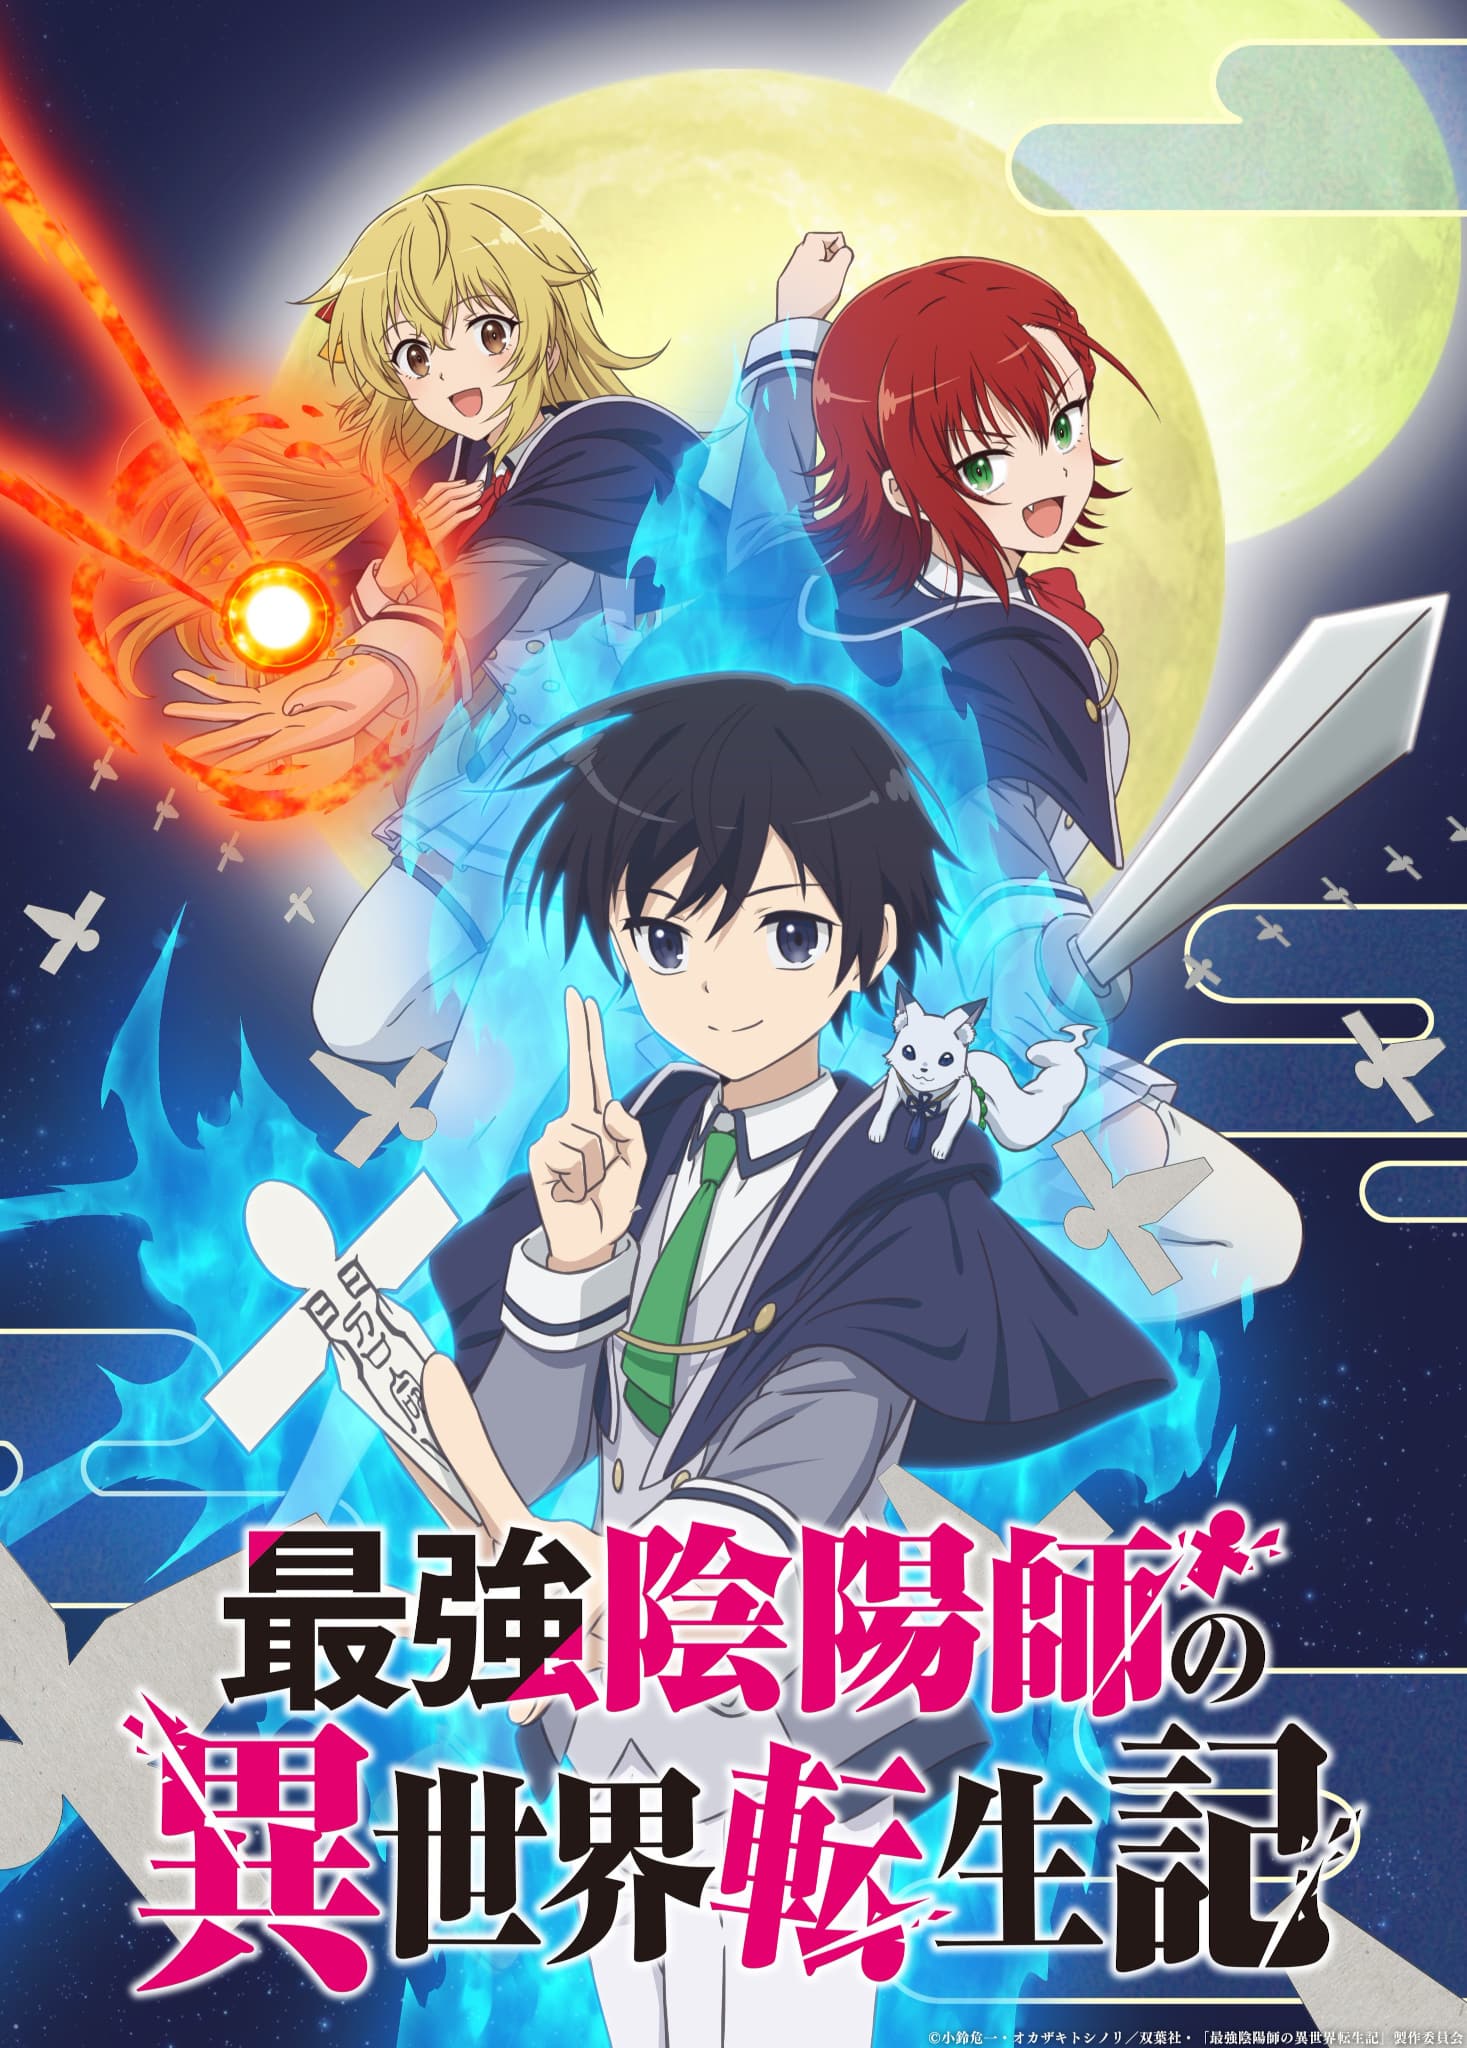 Premier visuel pour lanime The Reincarnation of the Strongest Exorcist in Another World